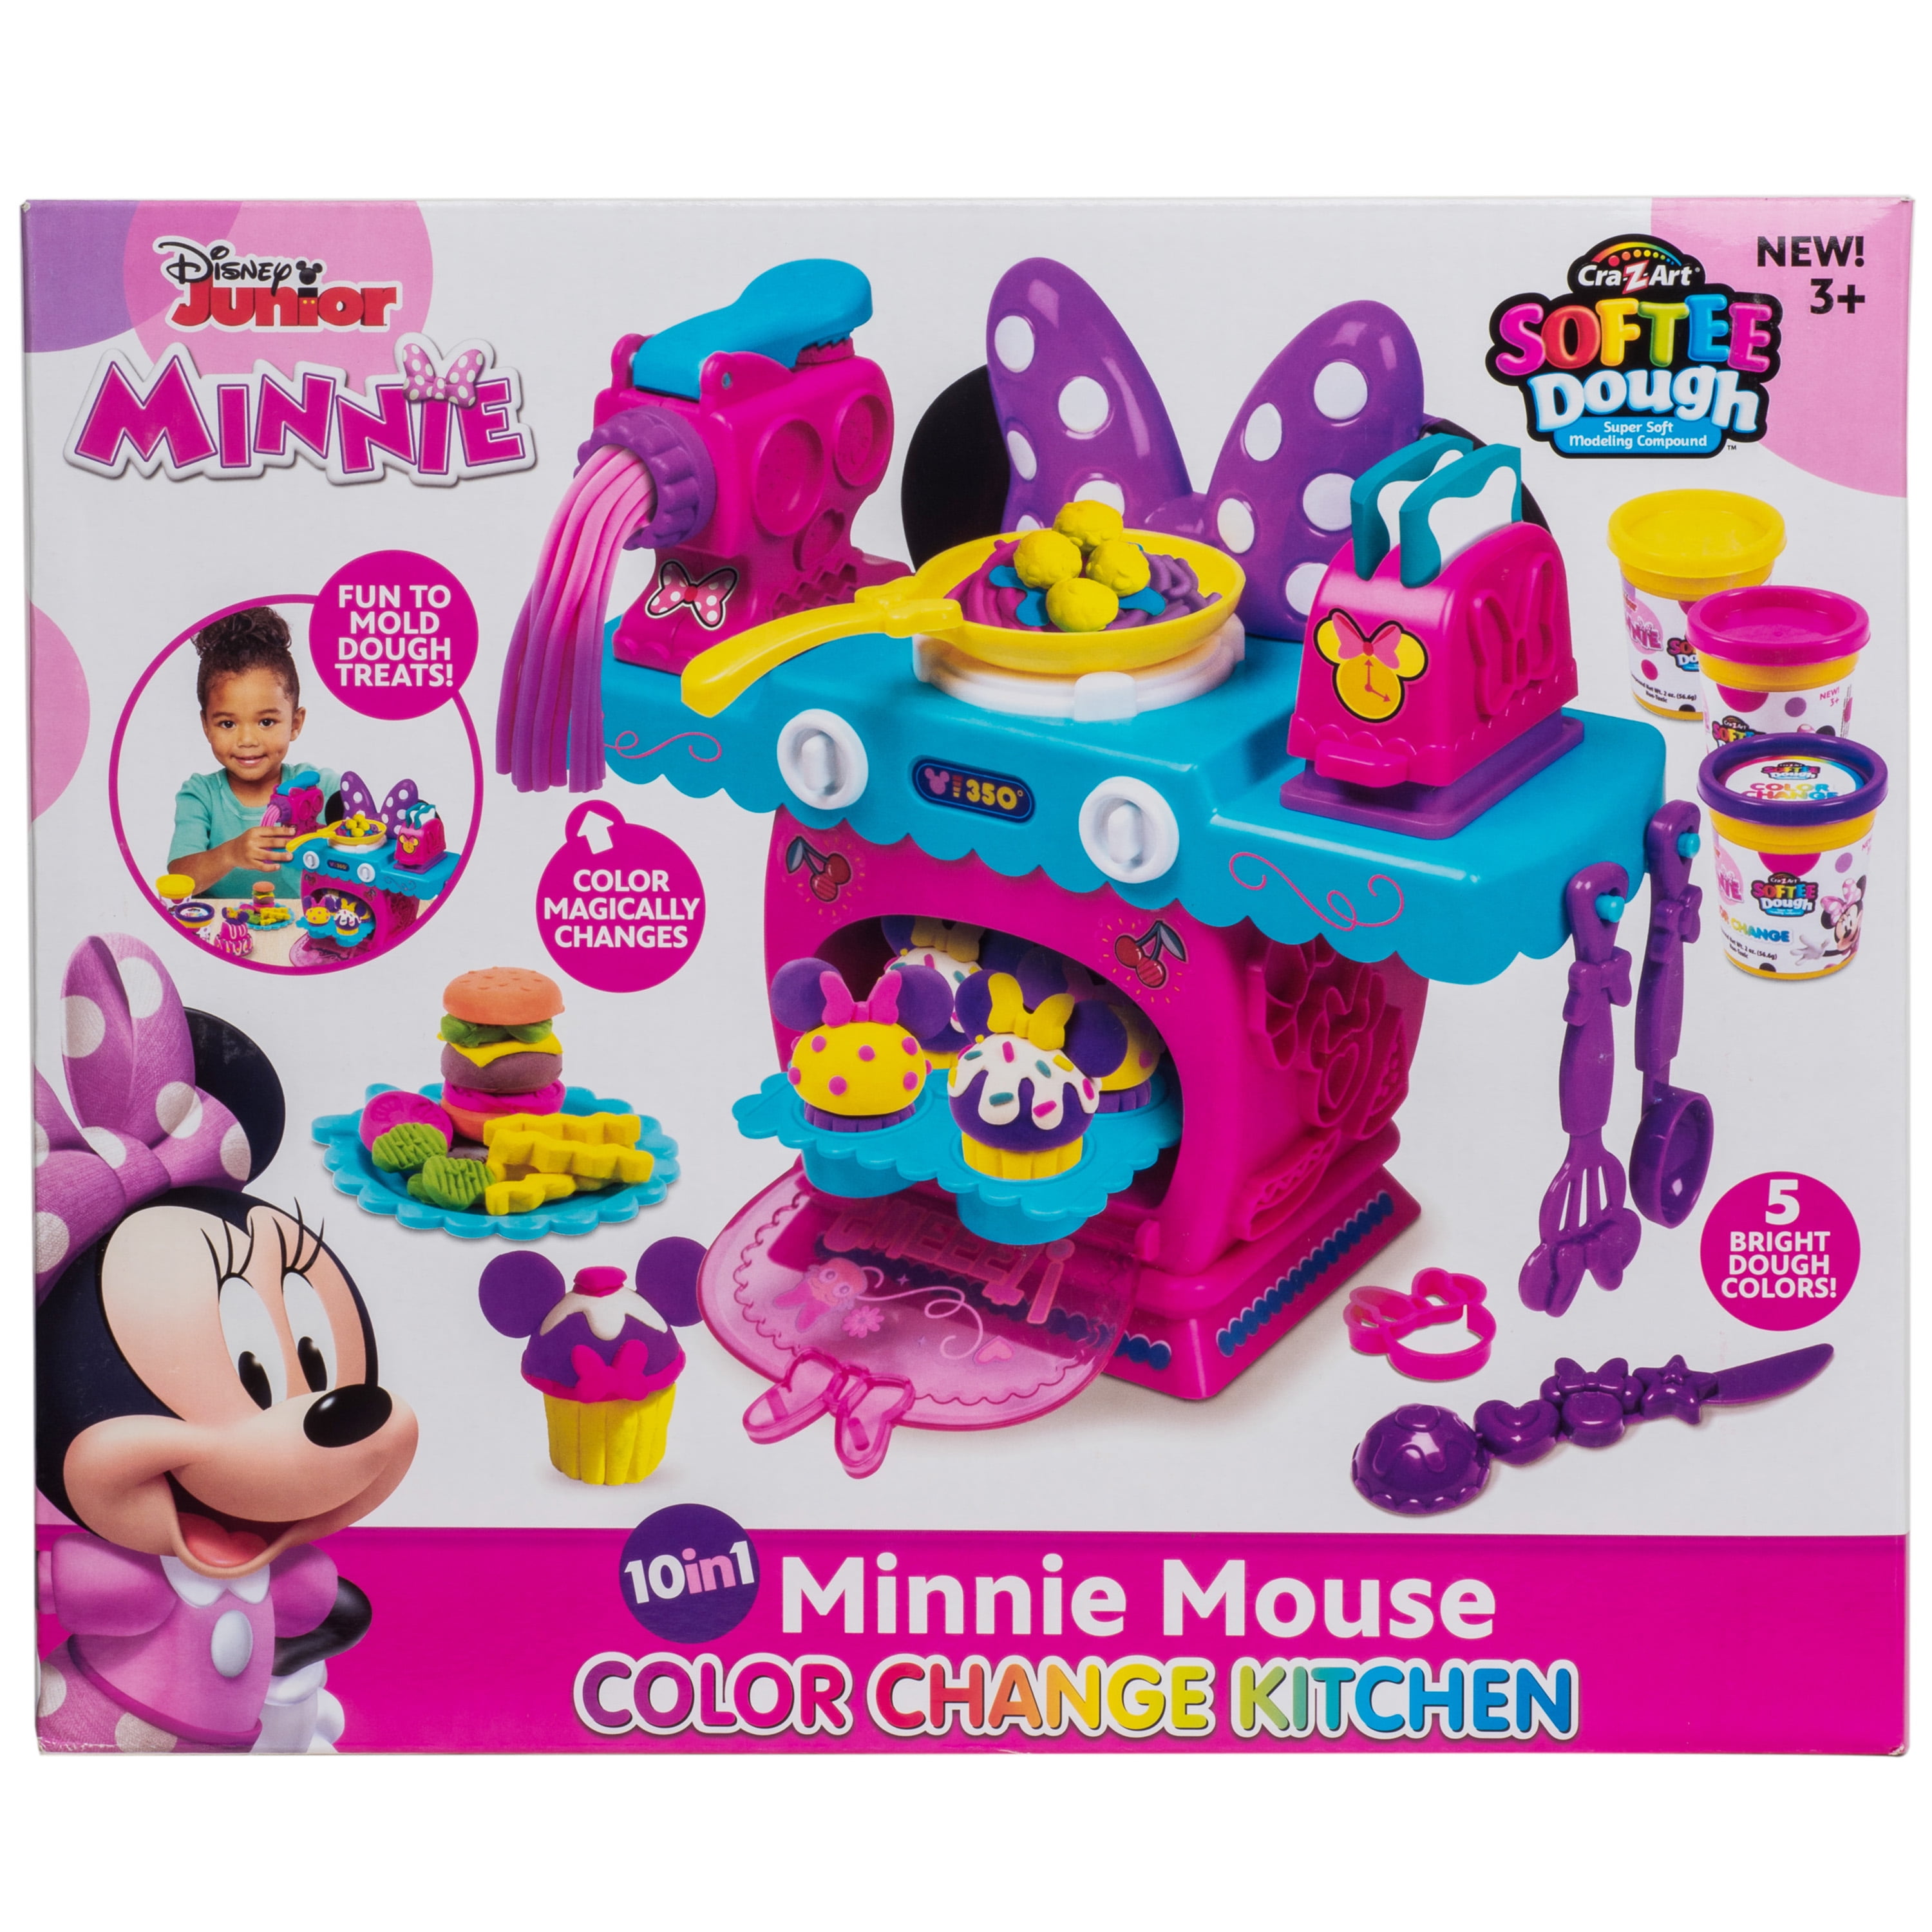 The Mouse Mansion - The Complete Kitchen Craft Kit